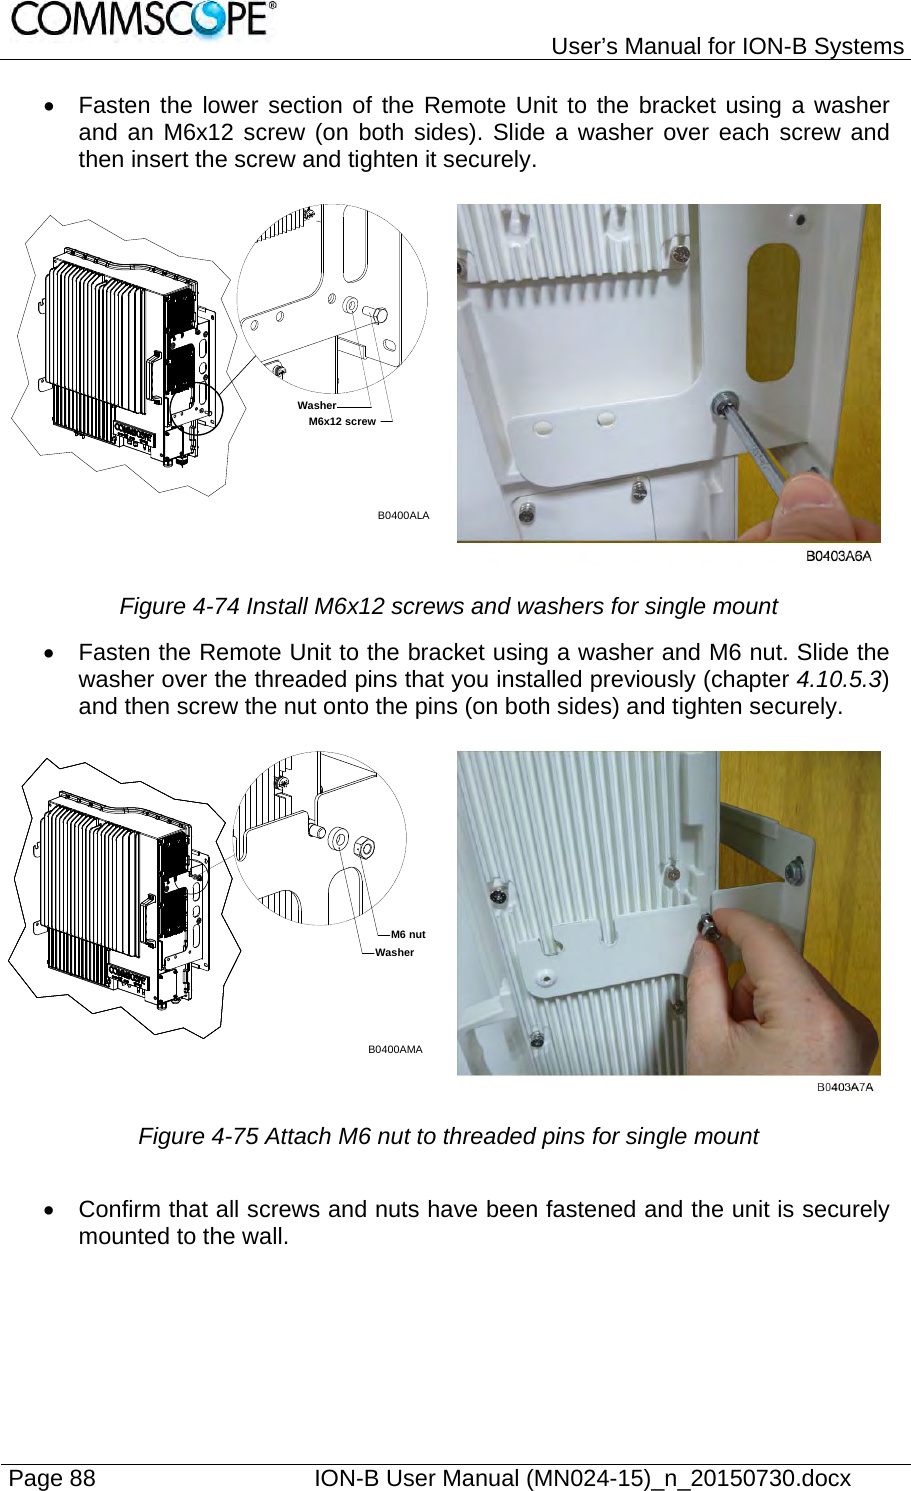   User’s Manual for ION-B Systems Page 88    ION-B User Manual (MN024-15)_n_20150730.docx    Fasten the lower section of the Remote Unit to the bracket using a washer and an M6x12 screw (on both sides). Slide a washer over each screw and then insert the screw and tighten it securely. Figure 4-74 Install M6x12 screws and washers for single mount   Fasten the Remote Unit to the bracket using a washer and M6 nut. Slide the washer over the threaded pins that you installed previously (chapter 4.10.5.3) and then screw the nut onto the pins (on both sides) and tighten securely.  Figure 4-75 Attach M6 nut to threaded pins for single mount    Confirm that all screws and nuts have been fastened and the unit is securely mounted to the wall. B0400ALAM6x12 screwWasherB0400AMAM6 nutWasher